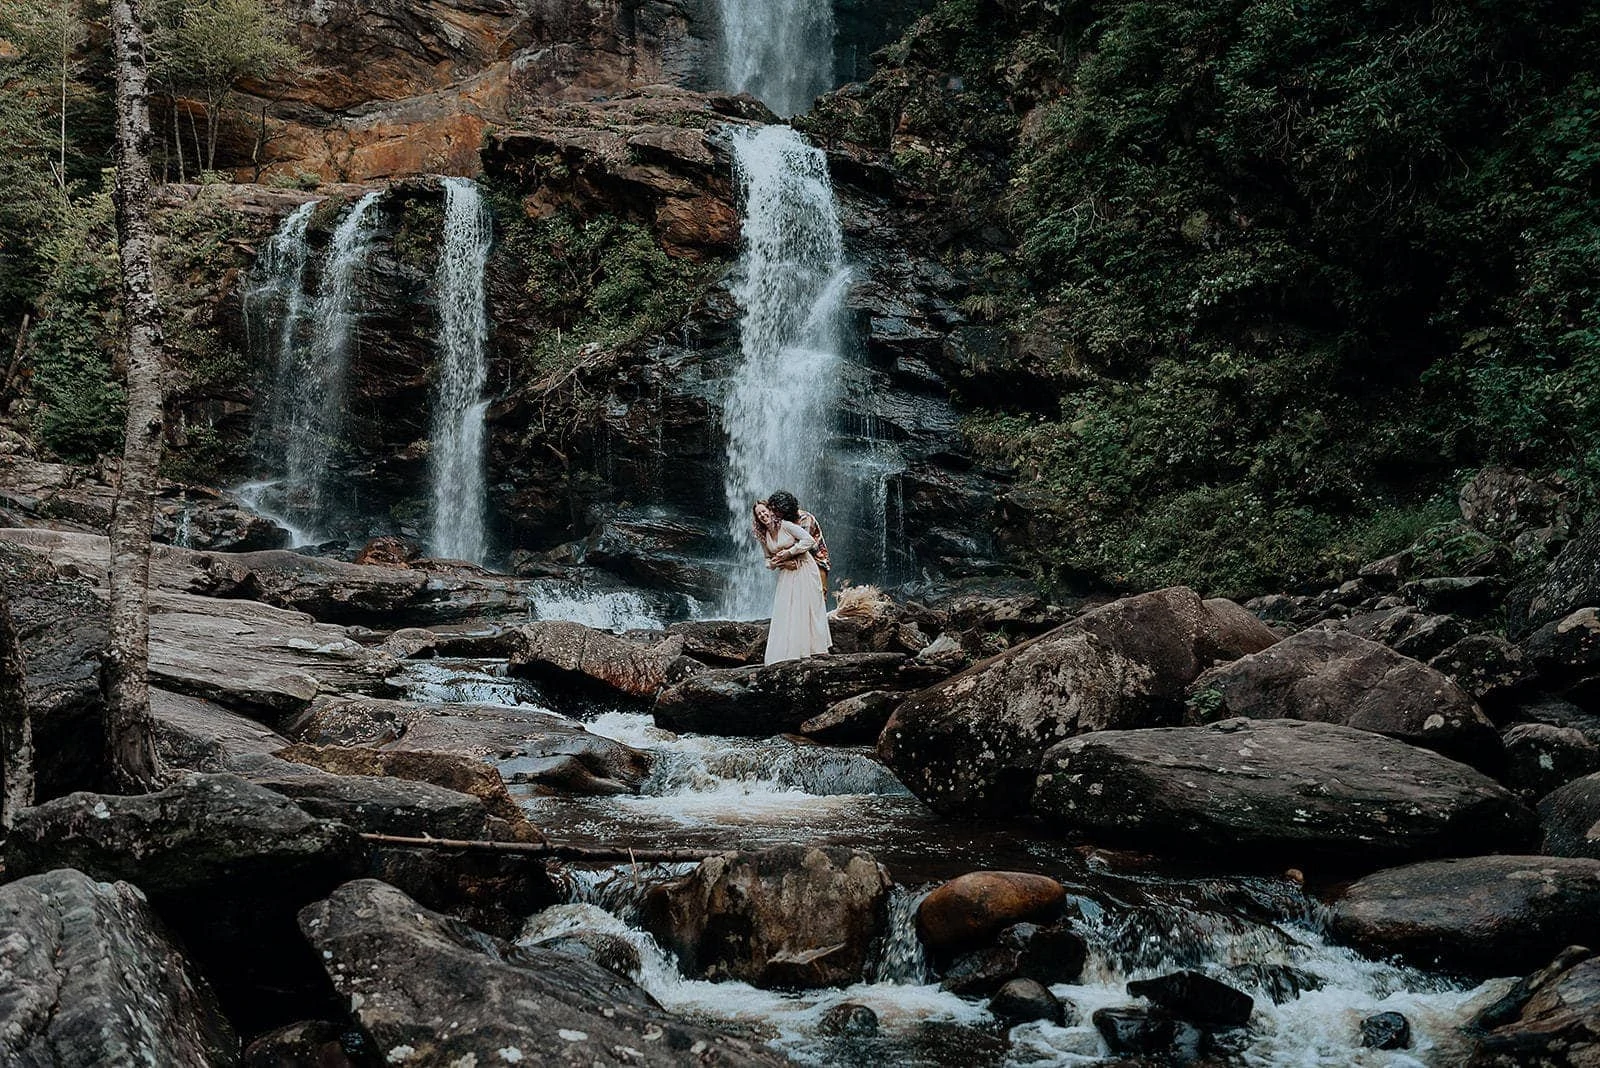 An eloping couple laughs together in front of a large waterfall in North Carolina